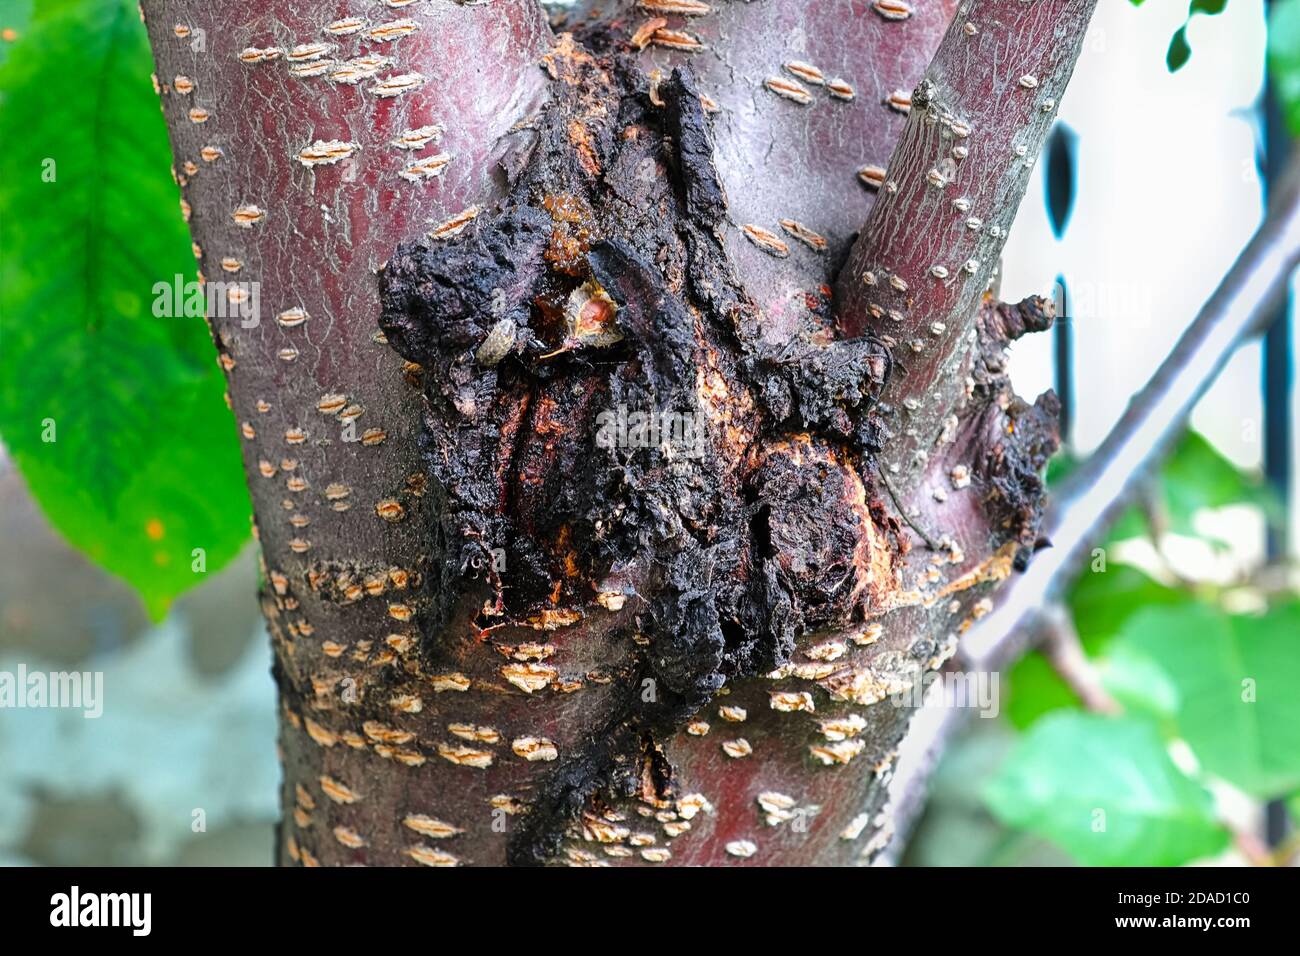 The festering bacterial canker wound on a cherry tree Stock Photo